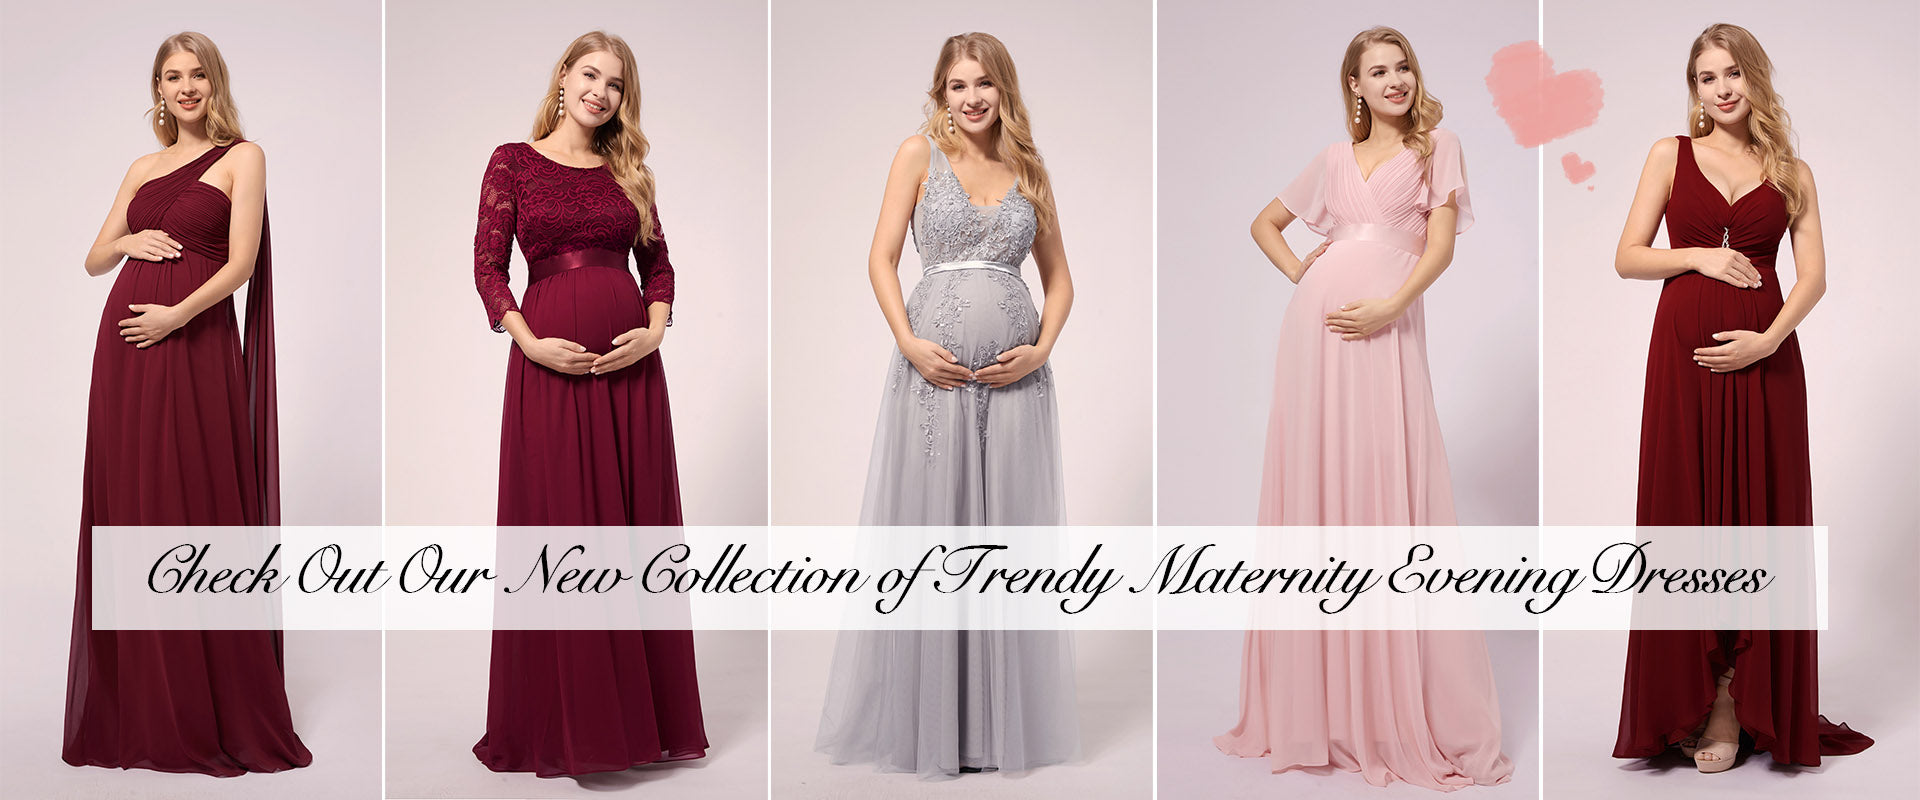 Check Out Our New Collection of Trendy Maternity Evening Dresses